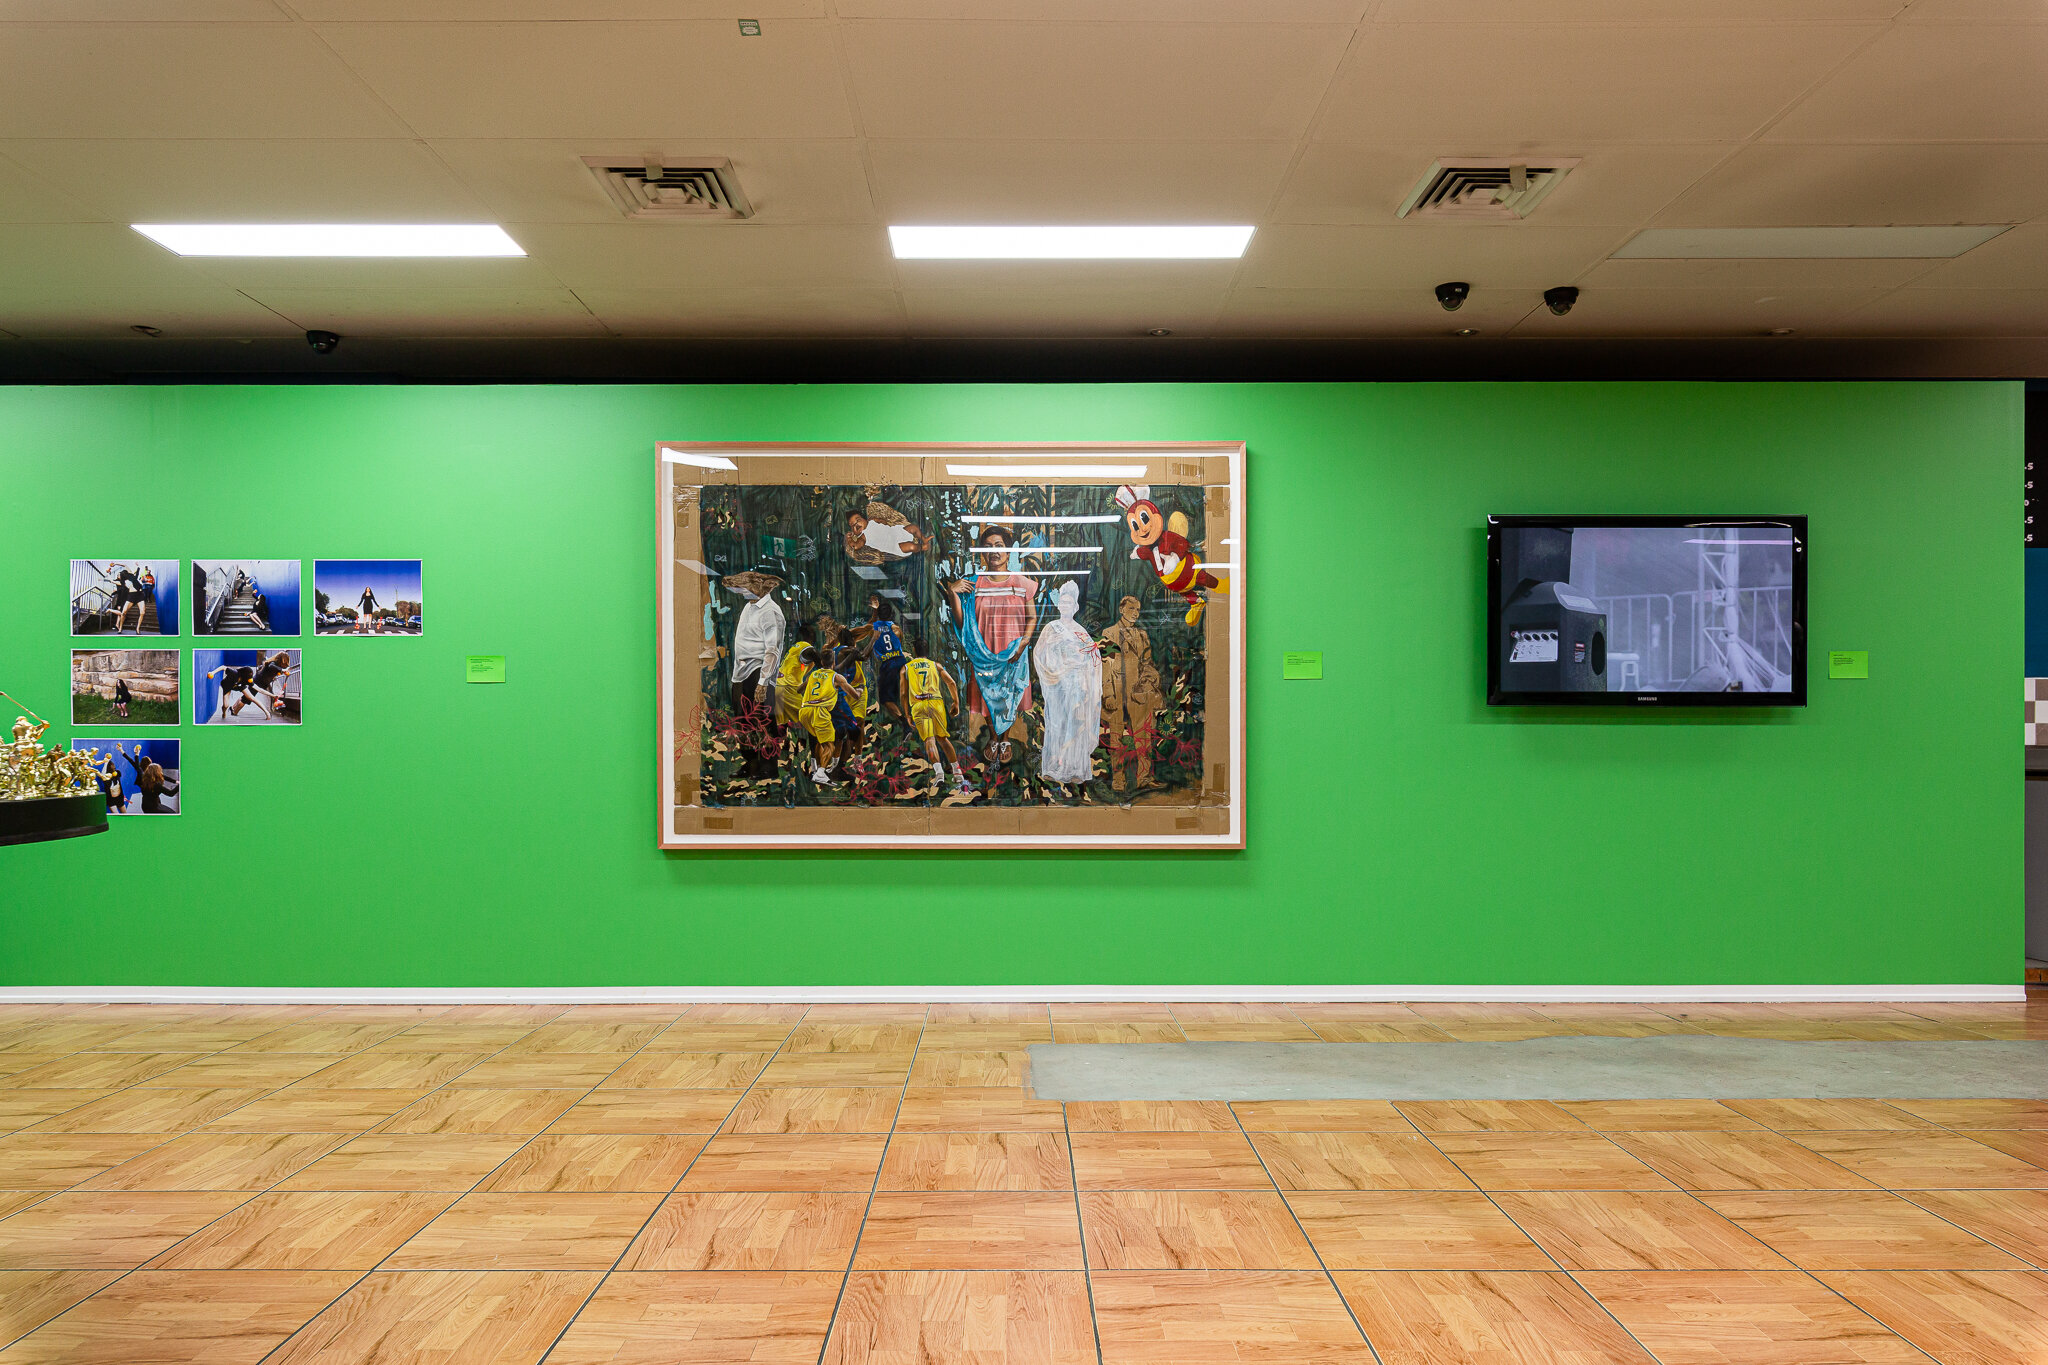   Sports Show,  2020, installation view, left to right: Marian Abboud &amp; Vicki Van Hout in collaboration with Tania Abbi-Assaf and Susan Abboud, ريصع  (Juice),  2020, Marikit Santiago,  Tagsibol/Tagsabong,  2018, Cigdem Aydemir,  The New National 